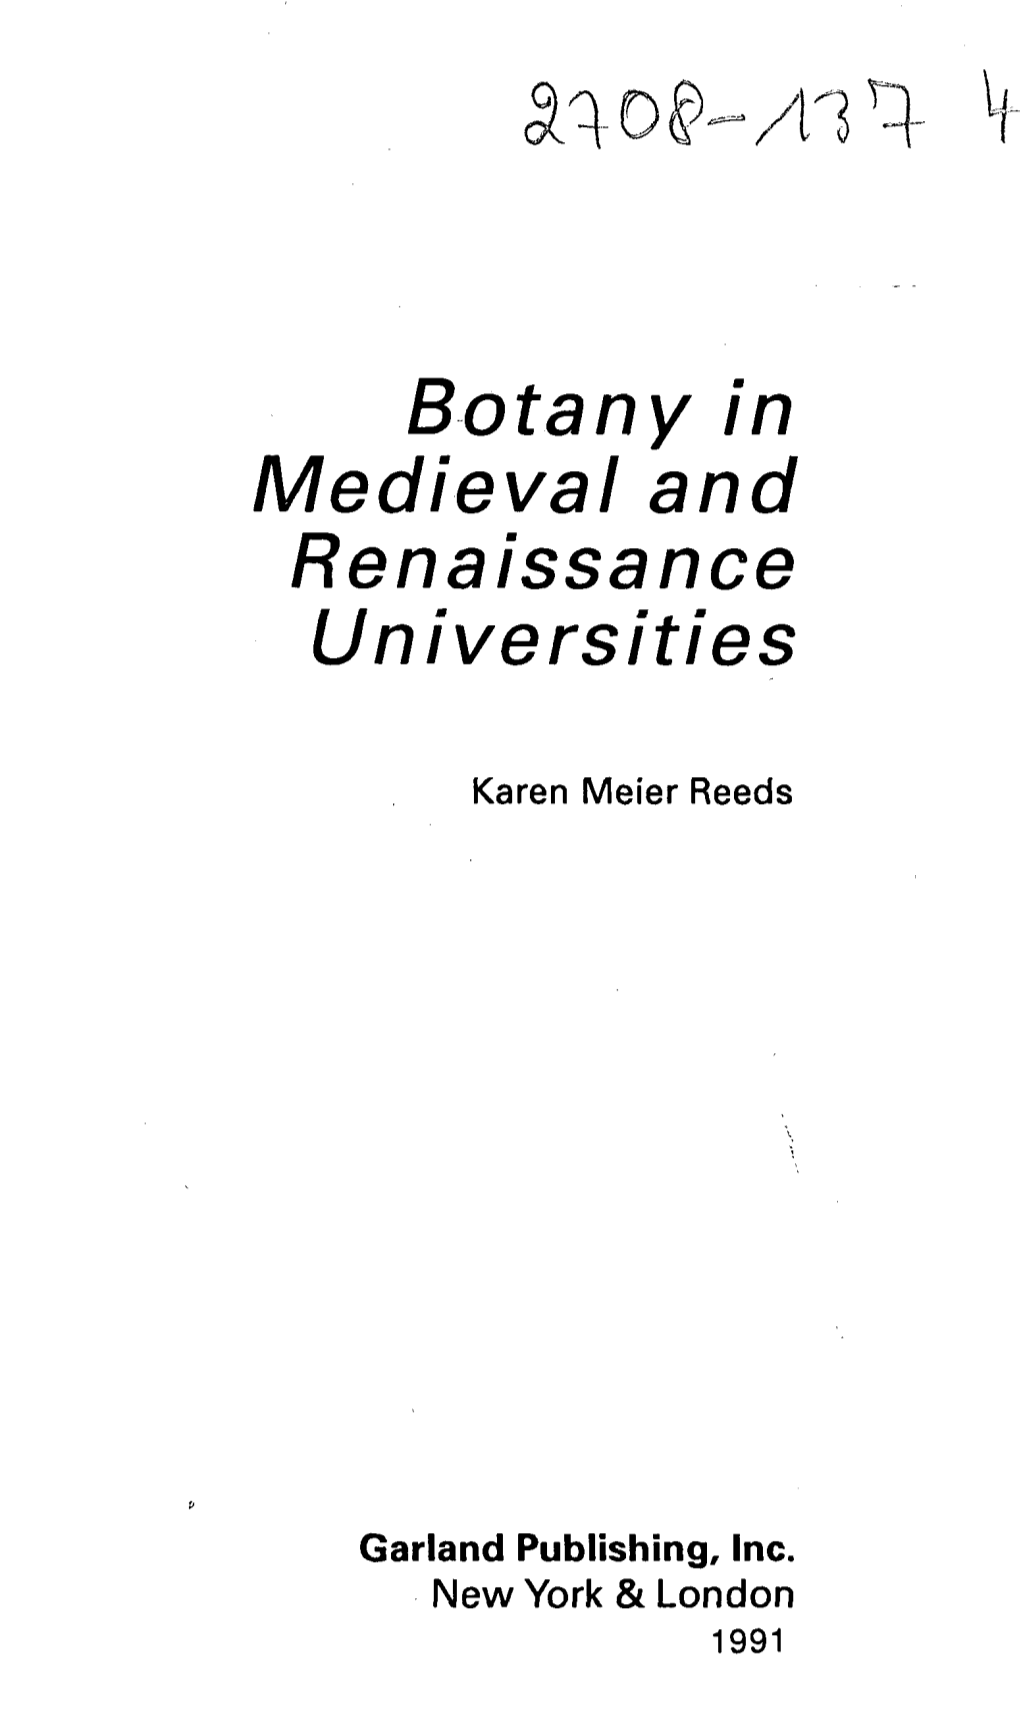 Botany in Medieval and Renaissance Universities